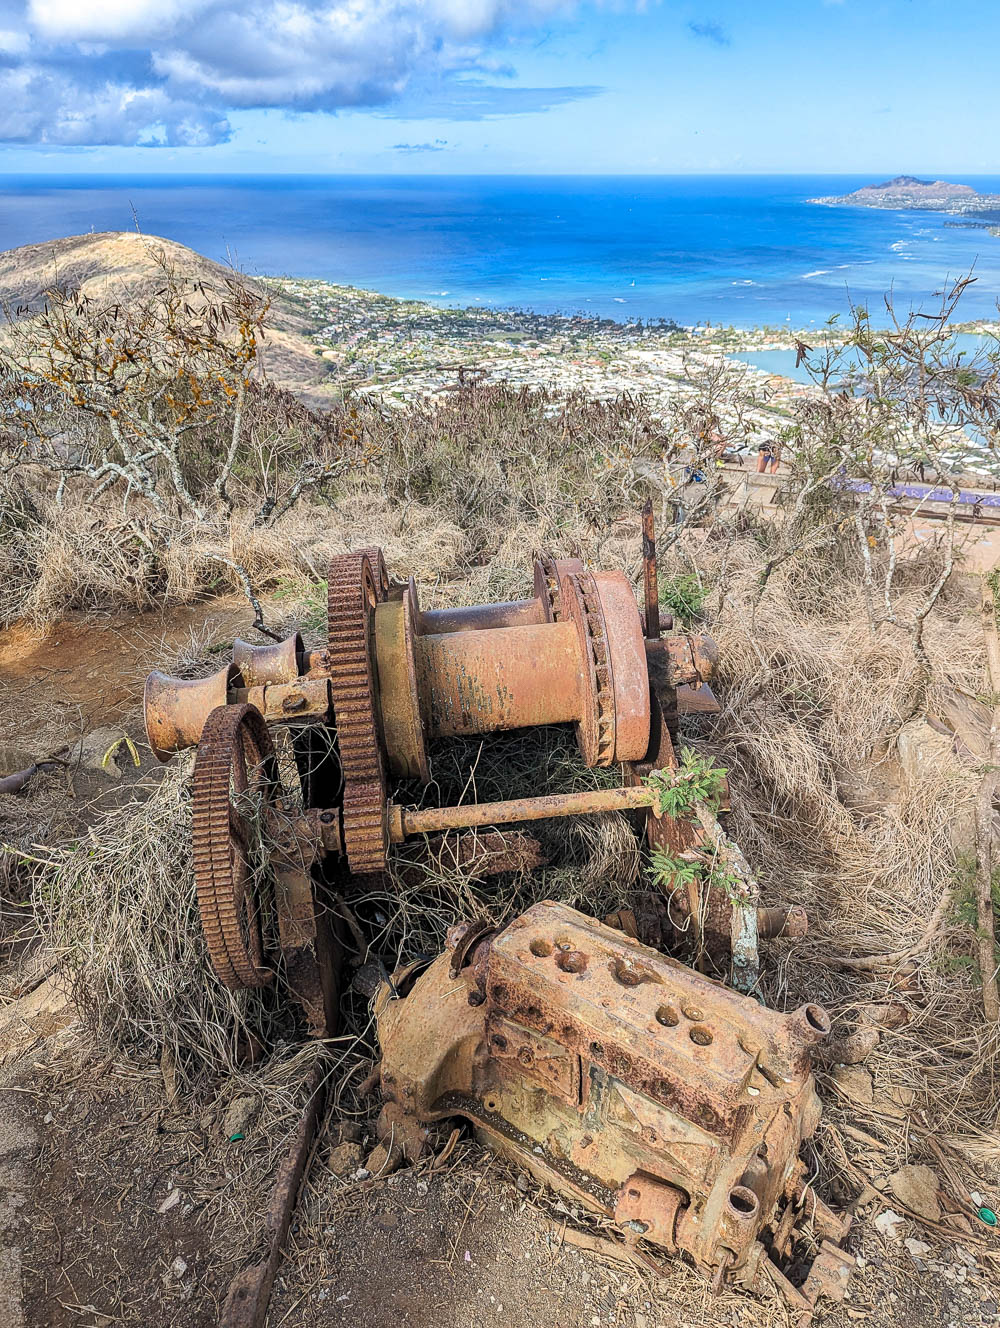 dirt hiking trail on the side of a mountain with rusty equipment strewn about